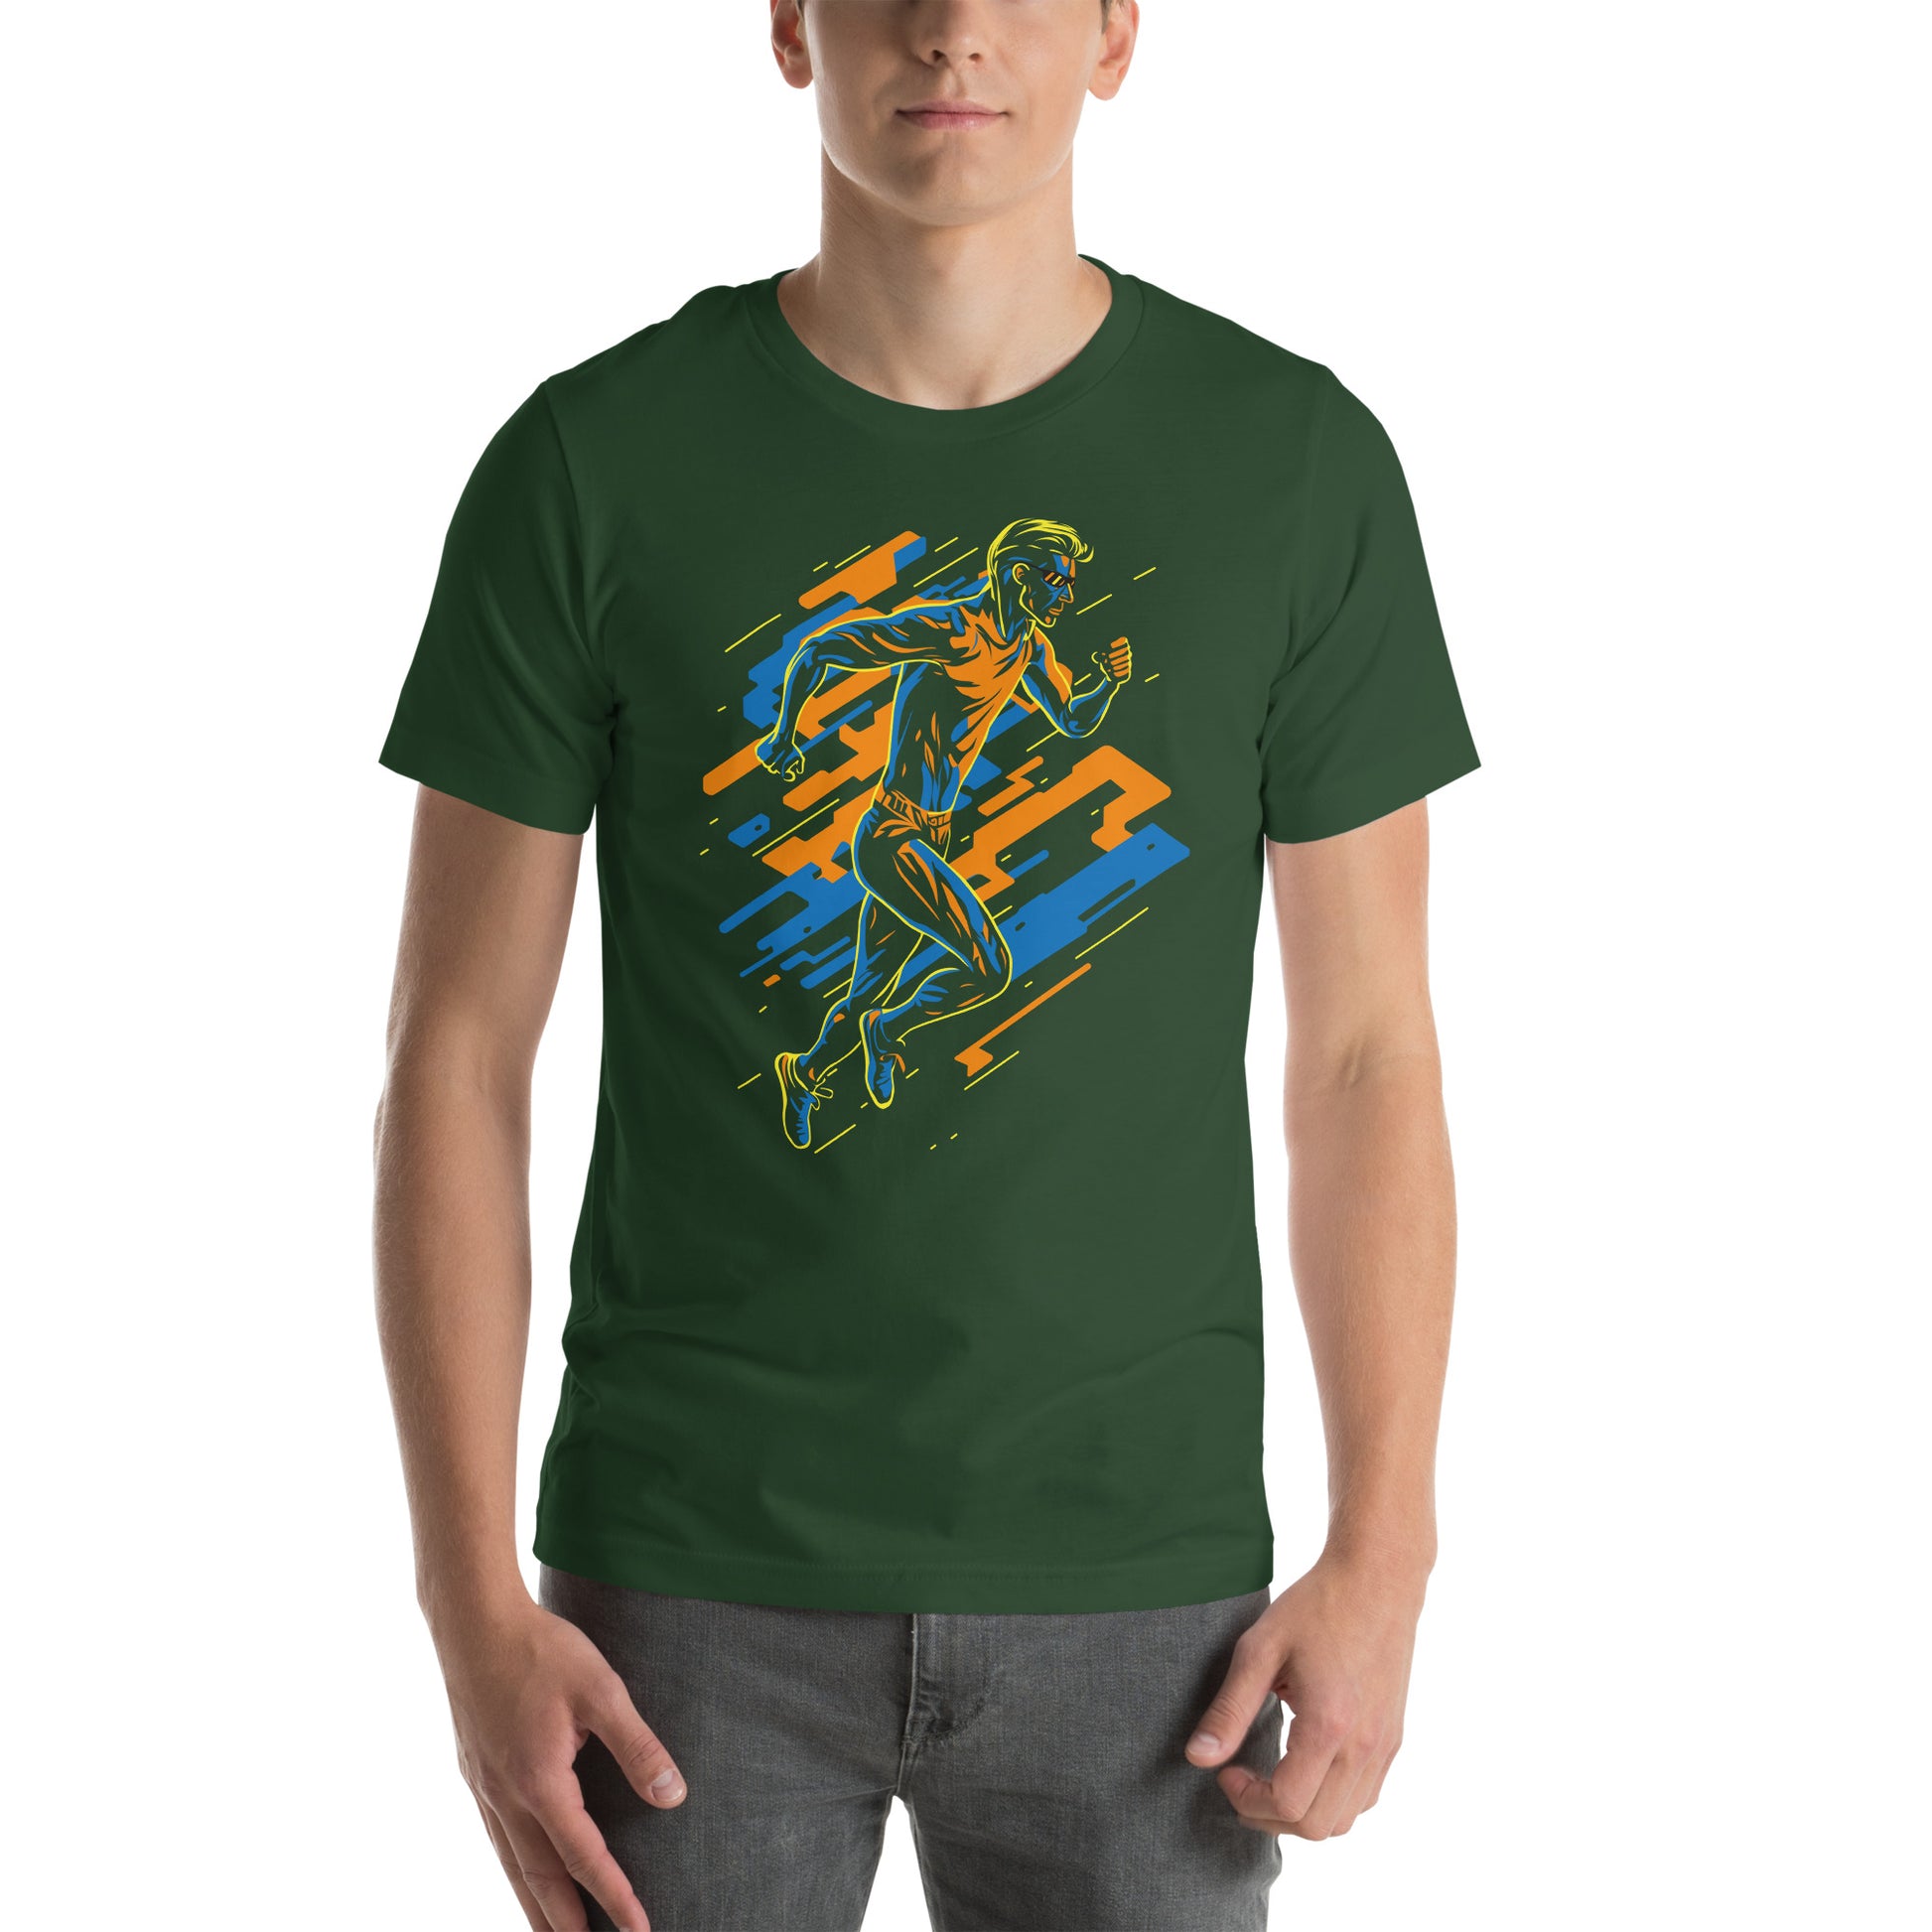 Forest Green T-Shirt featuring a vibrant and dynamic runner design, capturing the energy of a 'Running Man'. Taken from the TEQNEON Radioactive collection